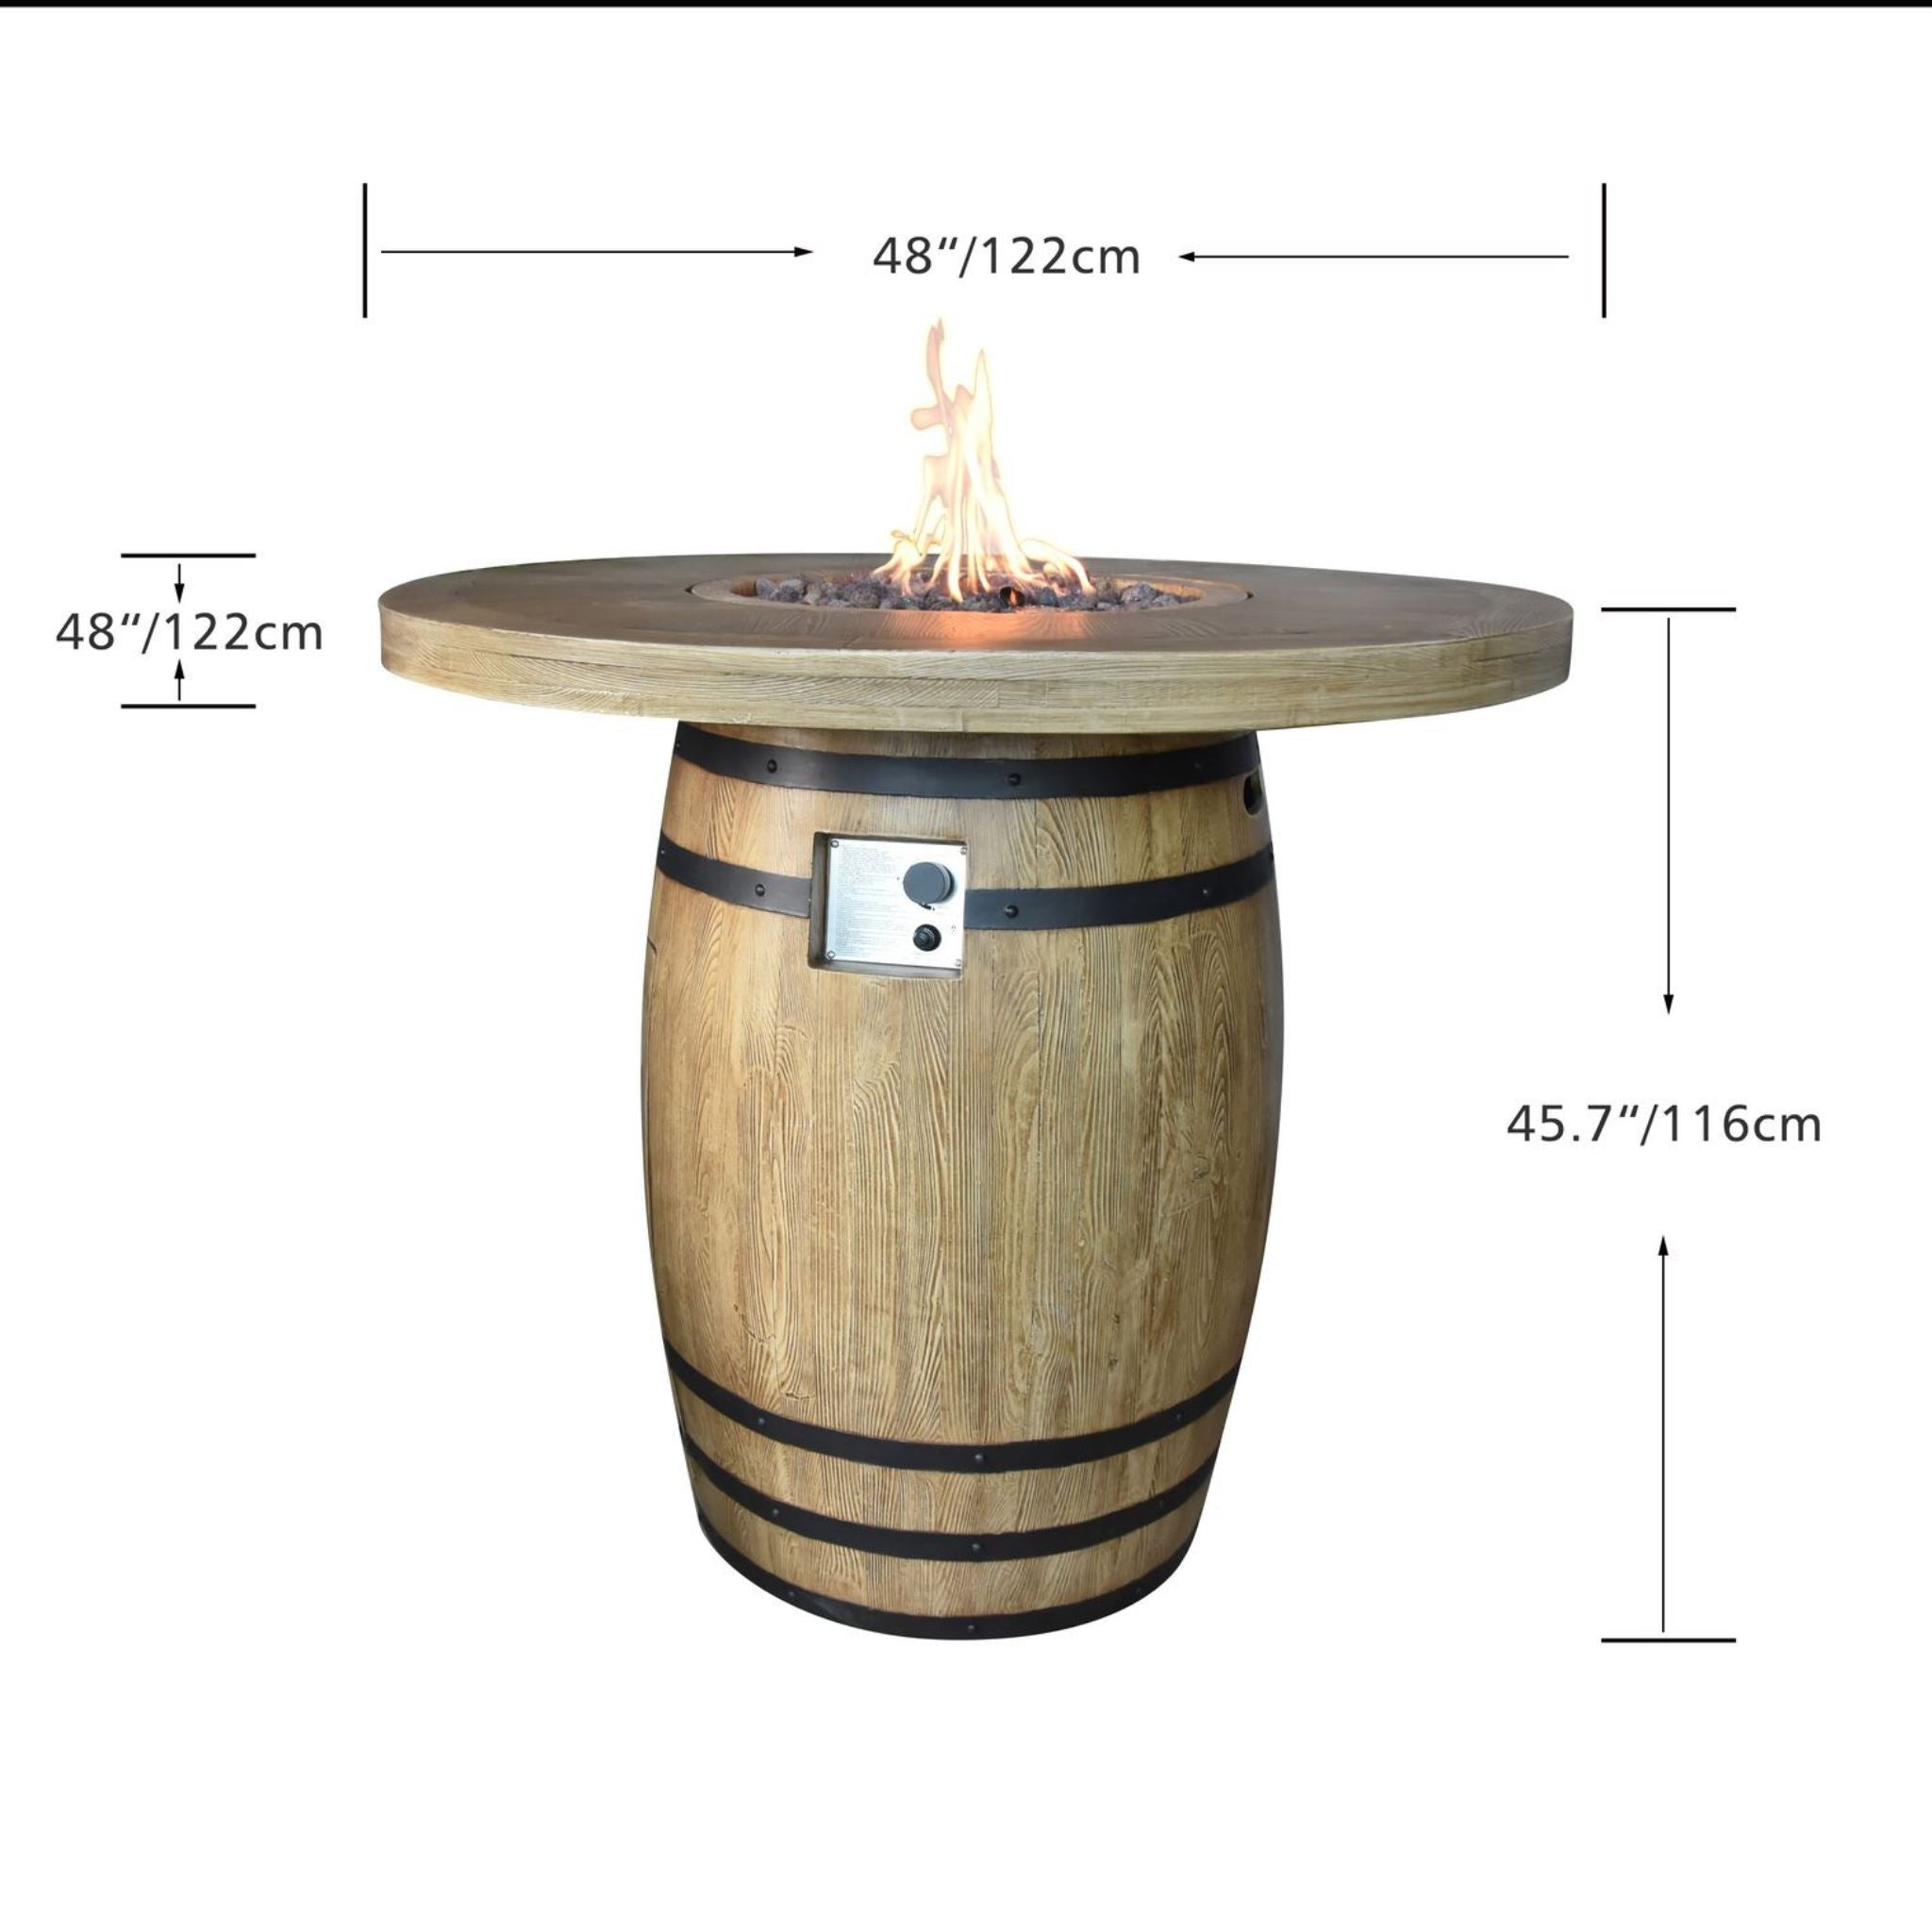 Elementi Tuscany Fire Table dimensions